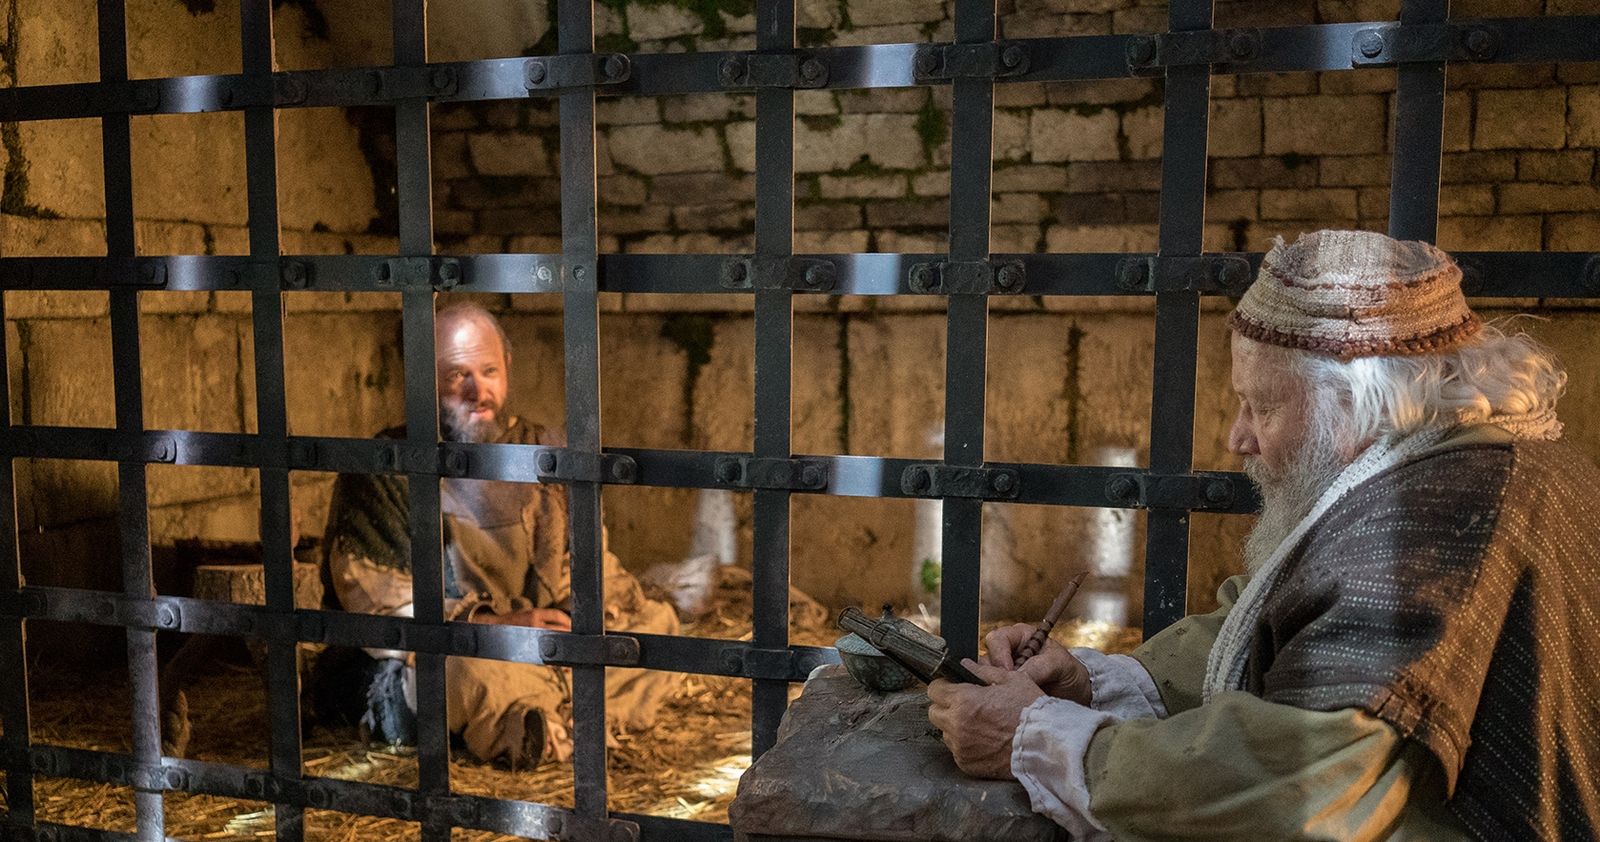 Paul, sitting in a prison cell with his hands shackled, dictates a letter to a scribe.